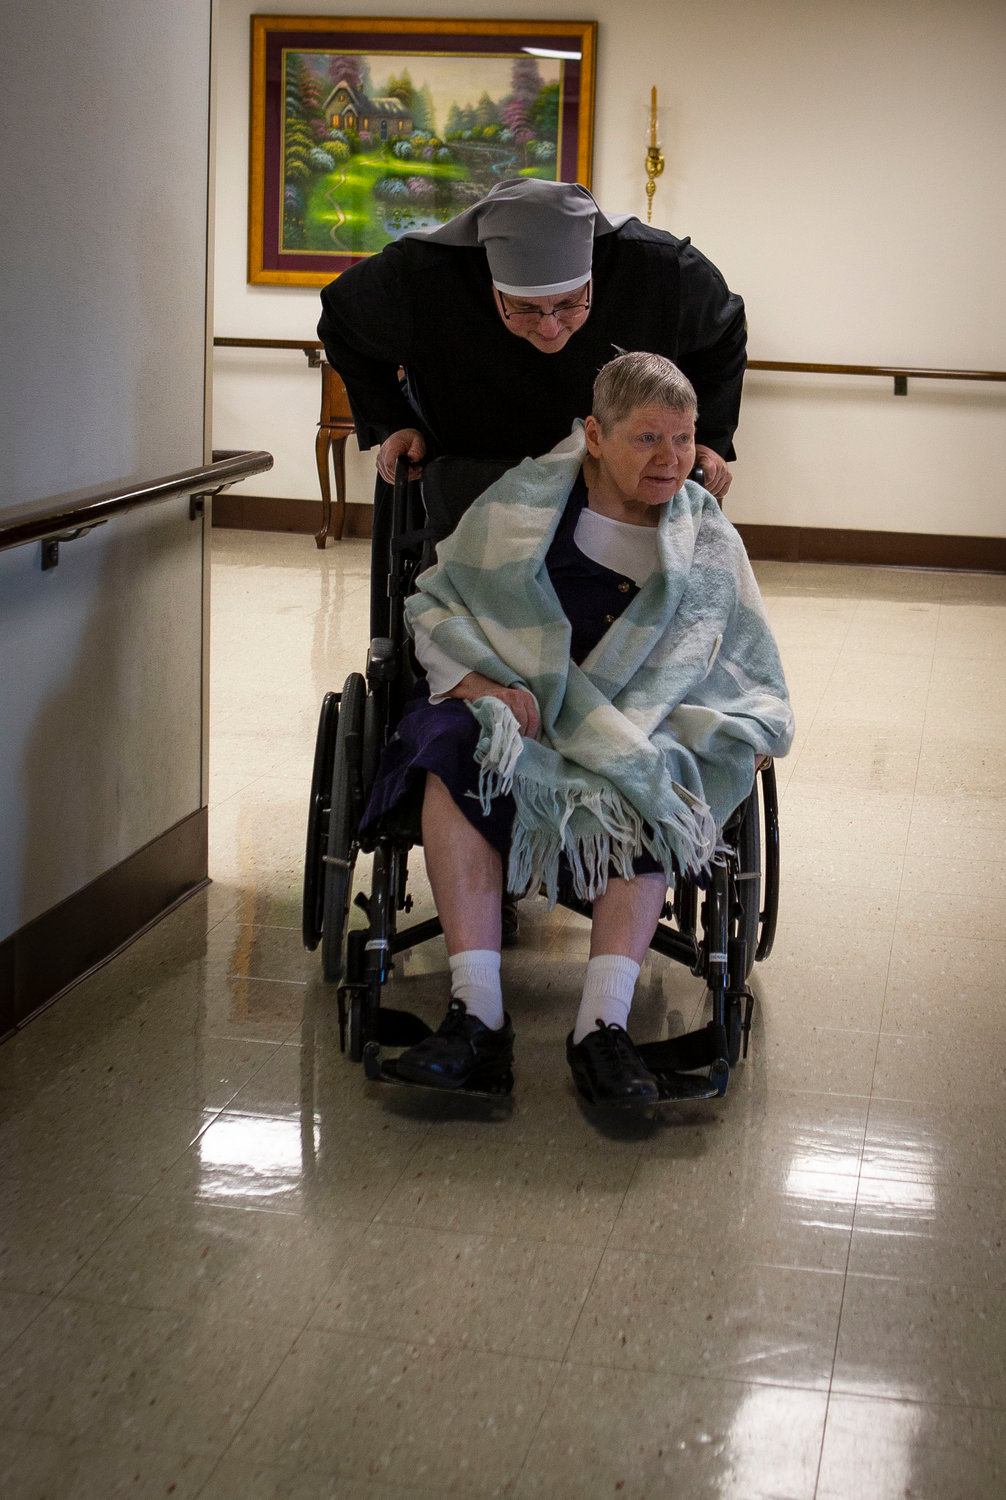 Sister Constance Veit, a Little Sister of the Poor, talks to an elderly resident of the Jeanne Jugan Residence for senior care in Washington while pushing her wheelchair March 25, 2019. Sister Constance is considered a spiritual mother by many of the residents, who said they will honor her on Mother’s Day.